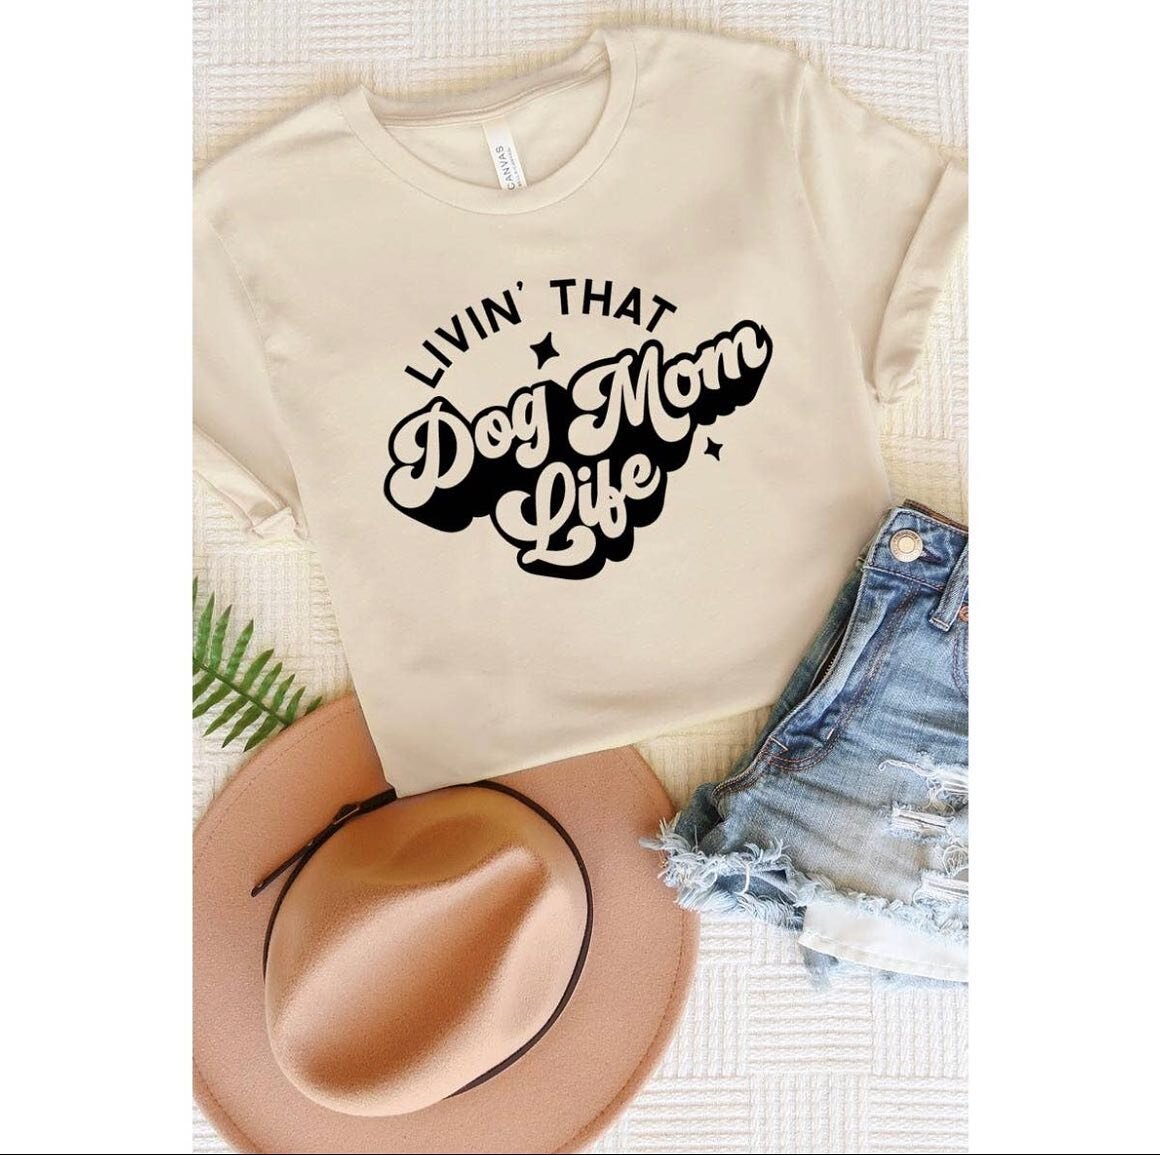 The perfect gift for any dog mom for Mother&rsquo;s Day! 💛

Available in sizes Small, Medium, &amp; Large! 

$29/each

$7 shipping fee 

We will hold item(s) for 24 hrs

#dogmomlife